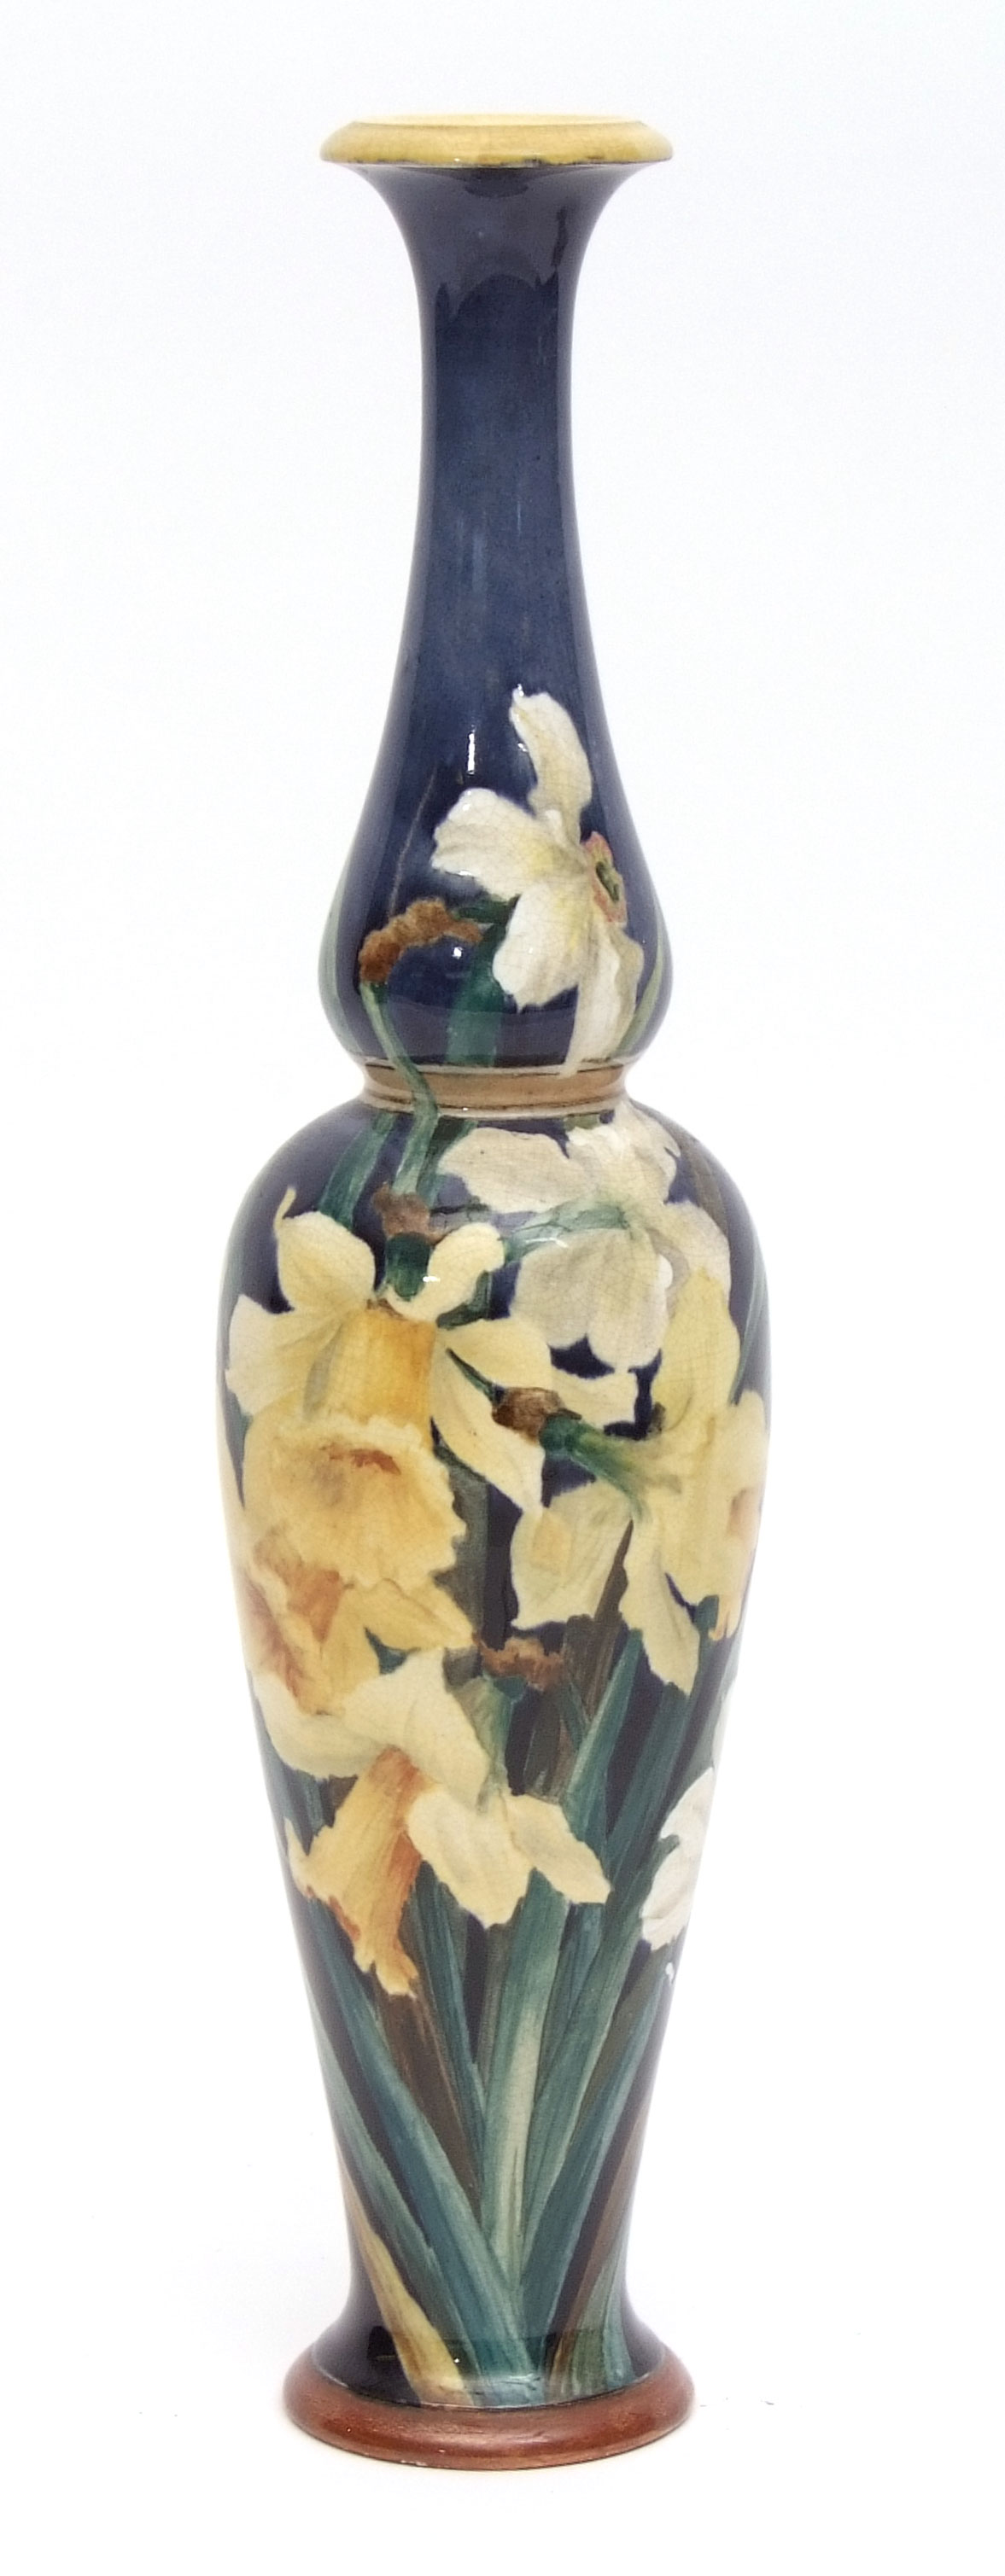 Late 19th century Doulton Lambeth faience vase decorated with daffodils by Katy Blake Smallfield,